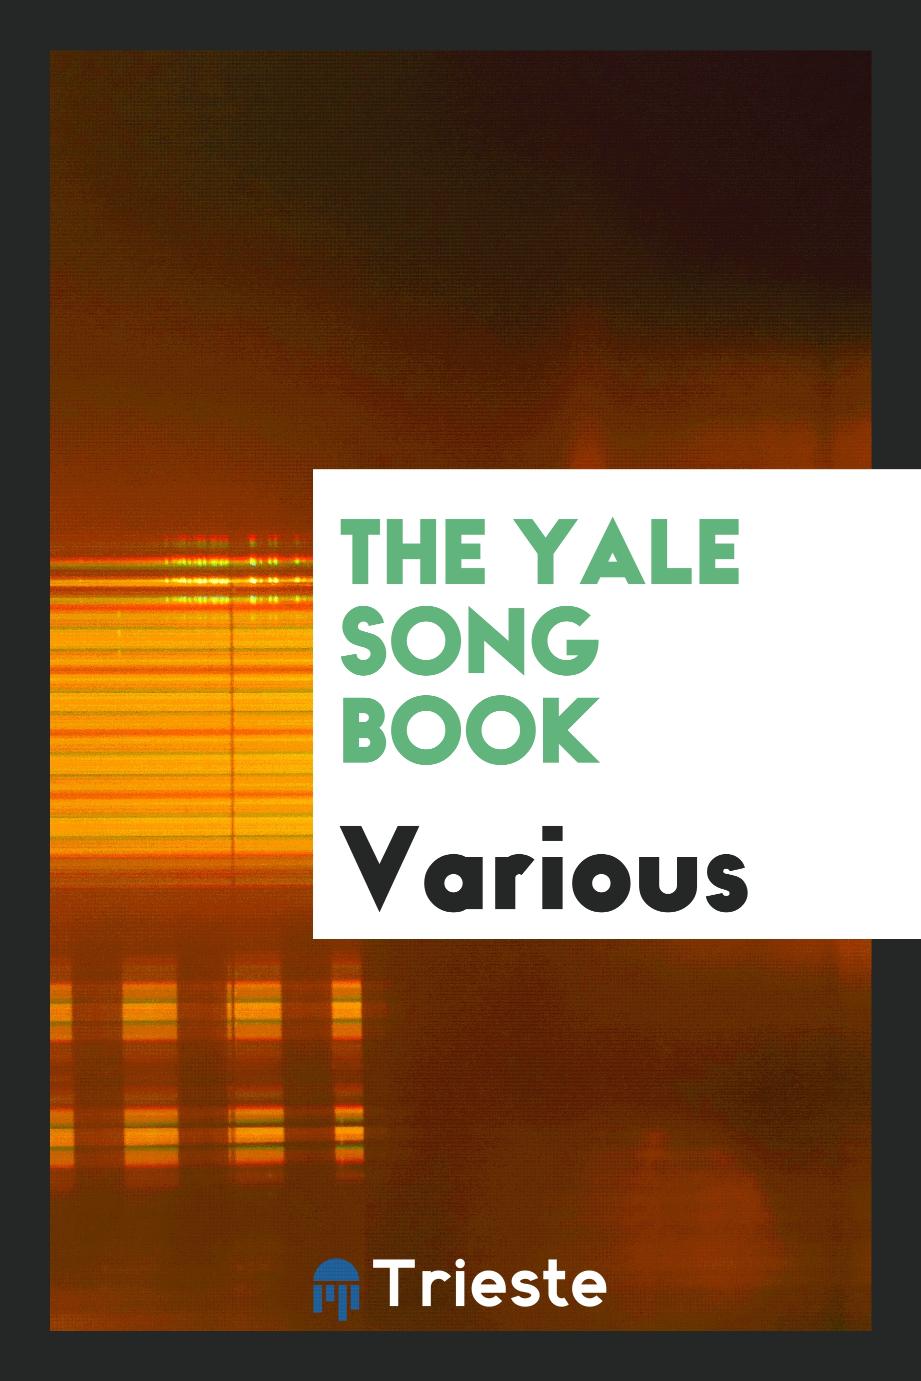 The Yale Song Book